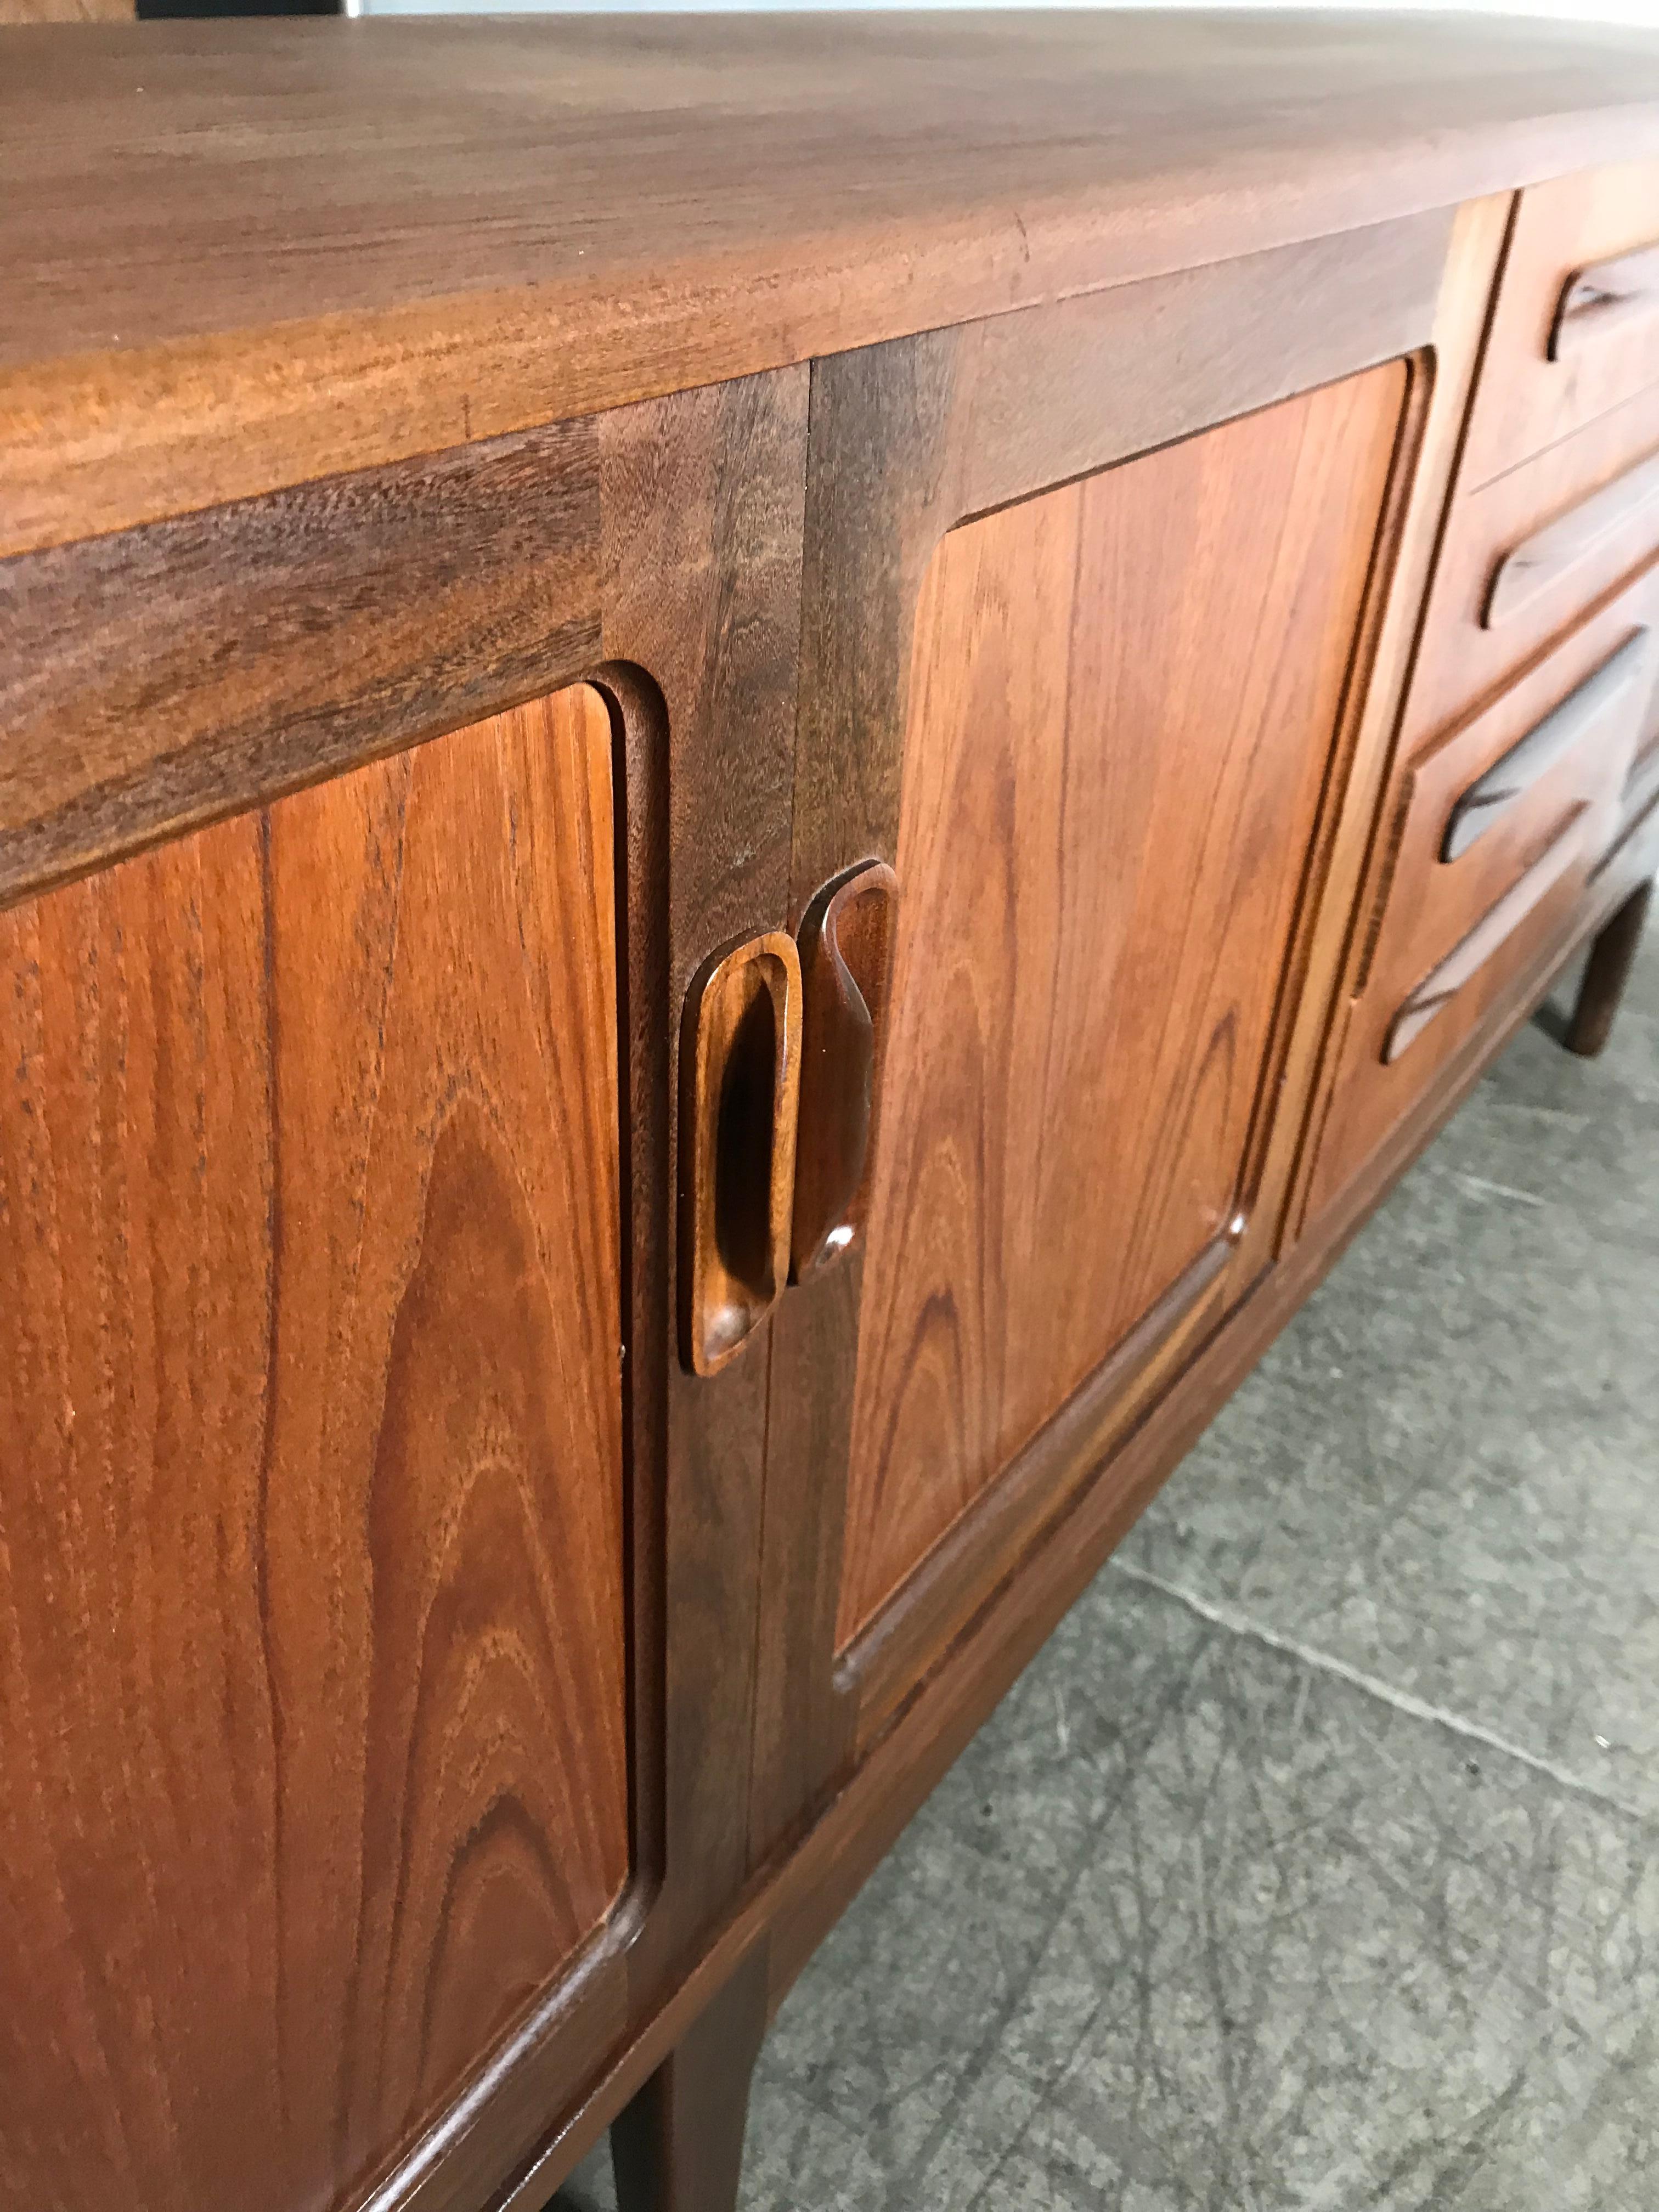 Stunning Danish modern credenza or sideboard by Kofod-Victor Wilkins teak wood construction, dovetail drawers. Featuring 4 drawers centre with top silverware drawer, 4 doors with shelf and amazing sculptural hand pulls. Beautiful bookmatched figured